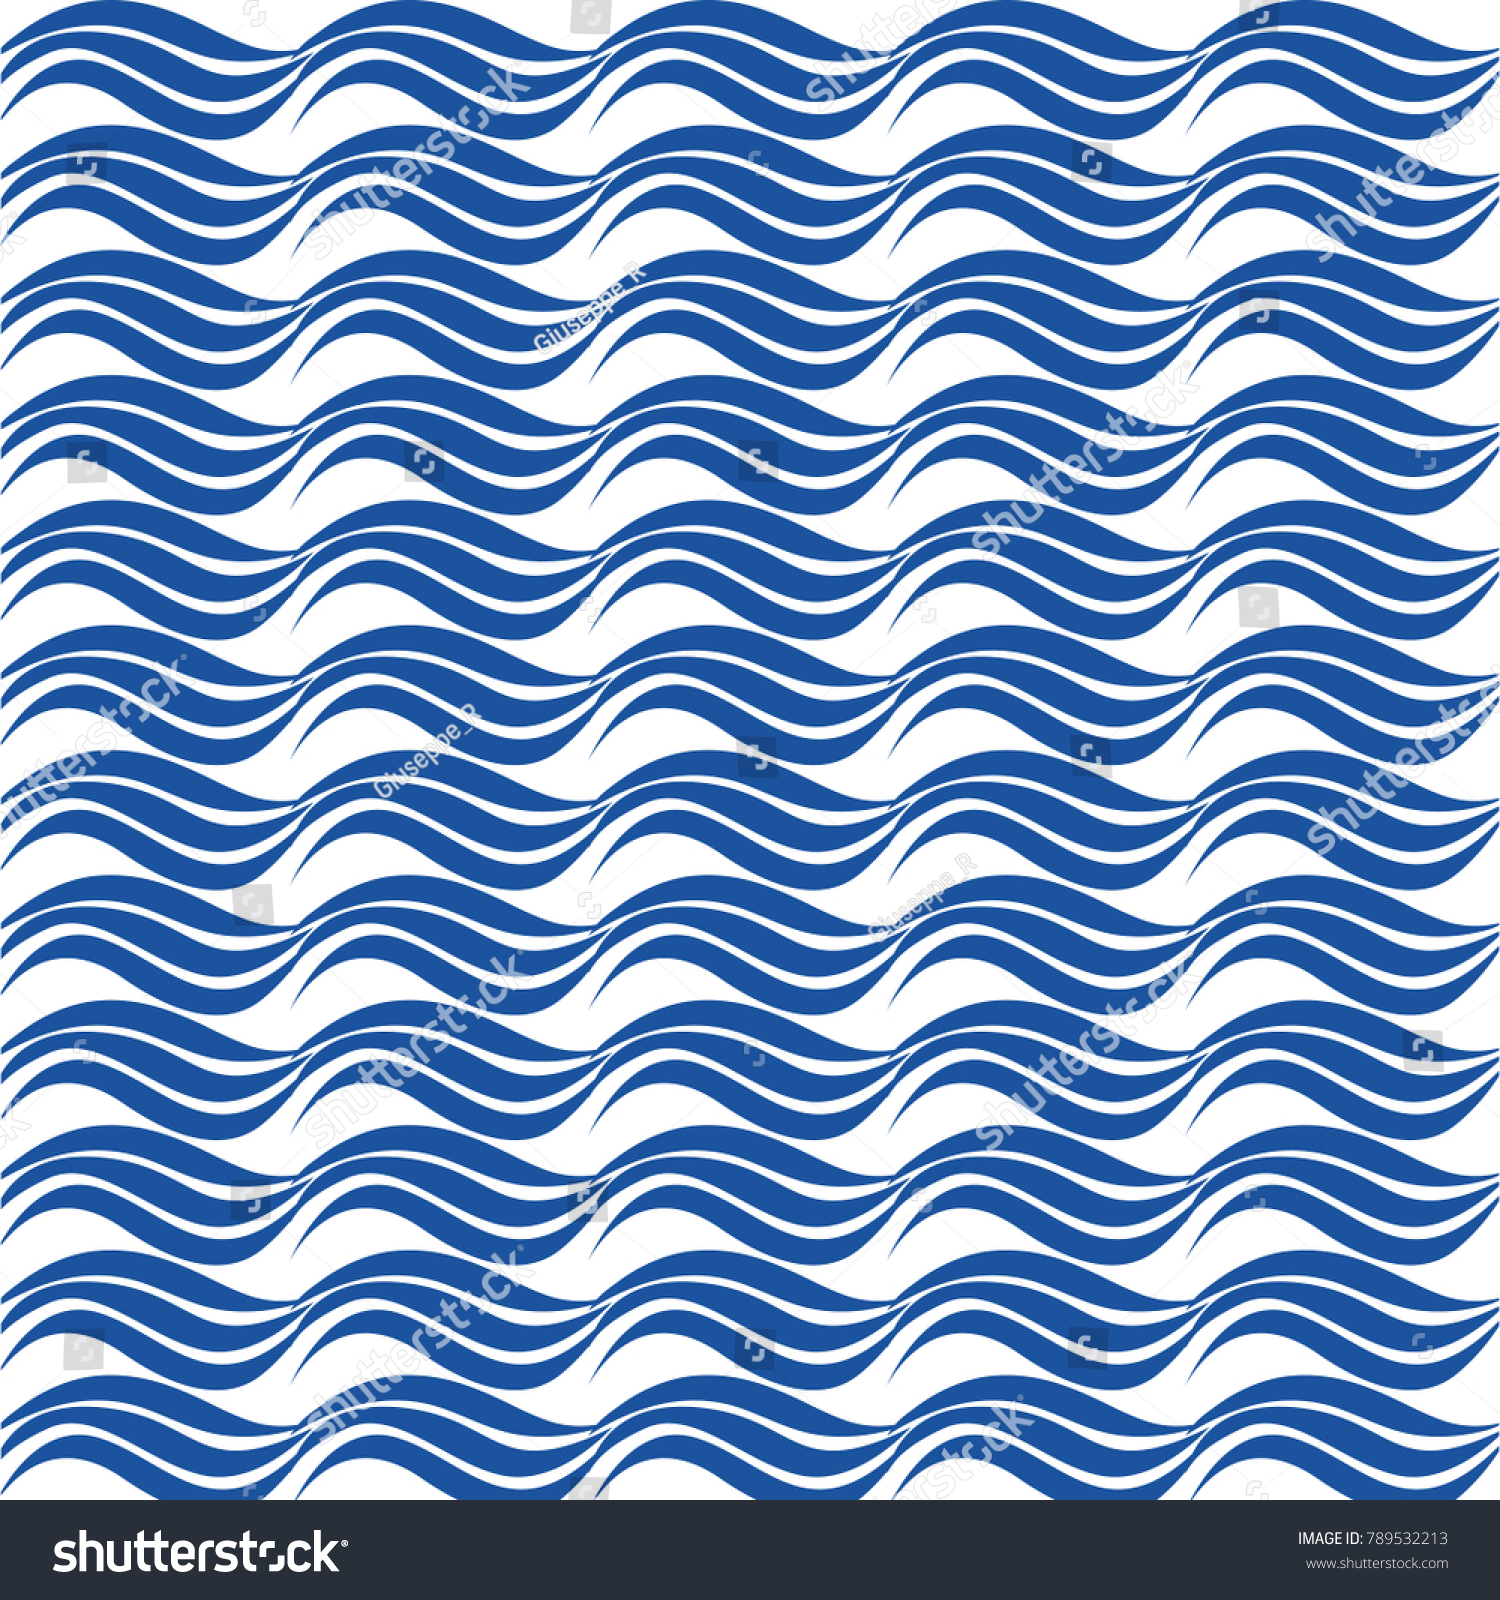 blue shape wave abstract pattern background #789532213